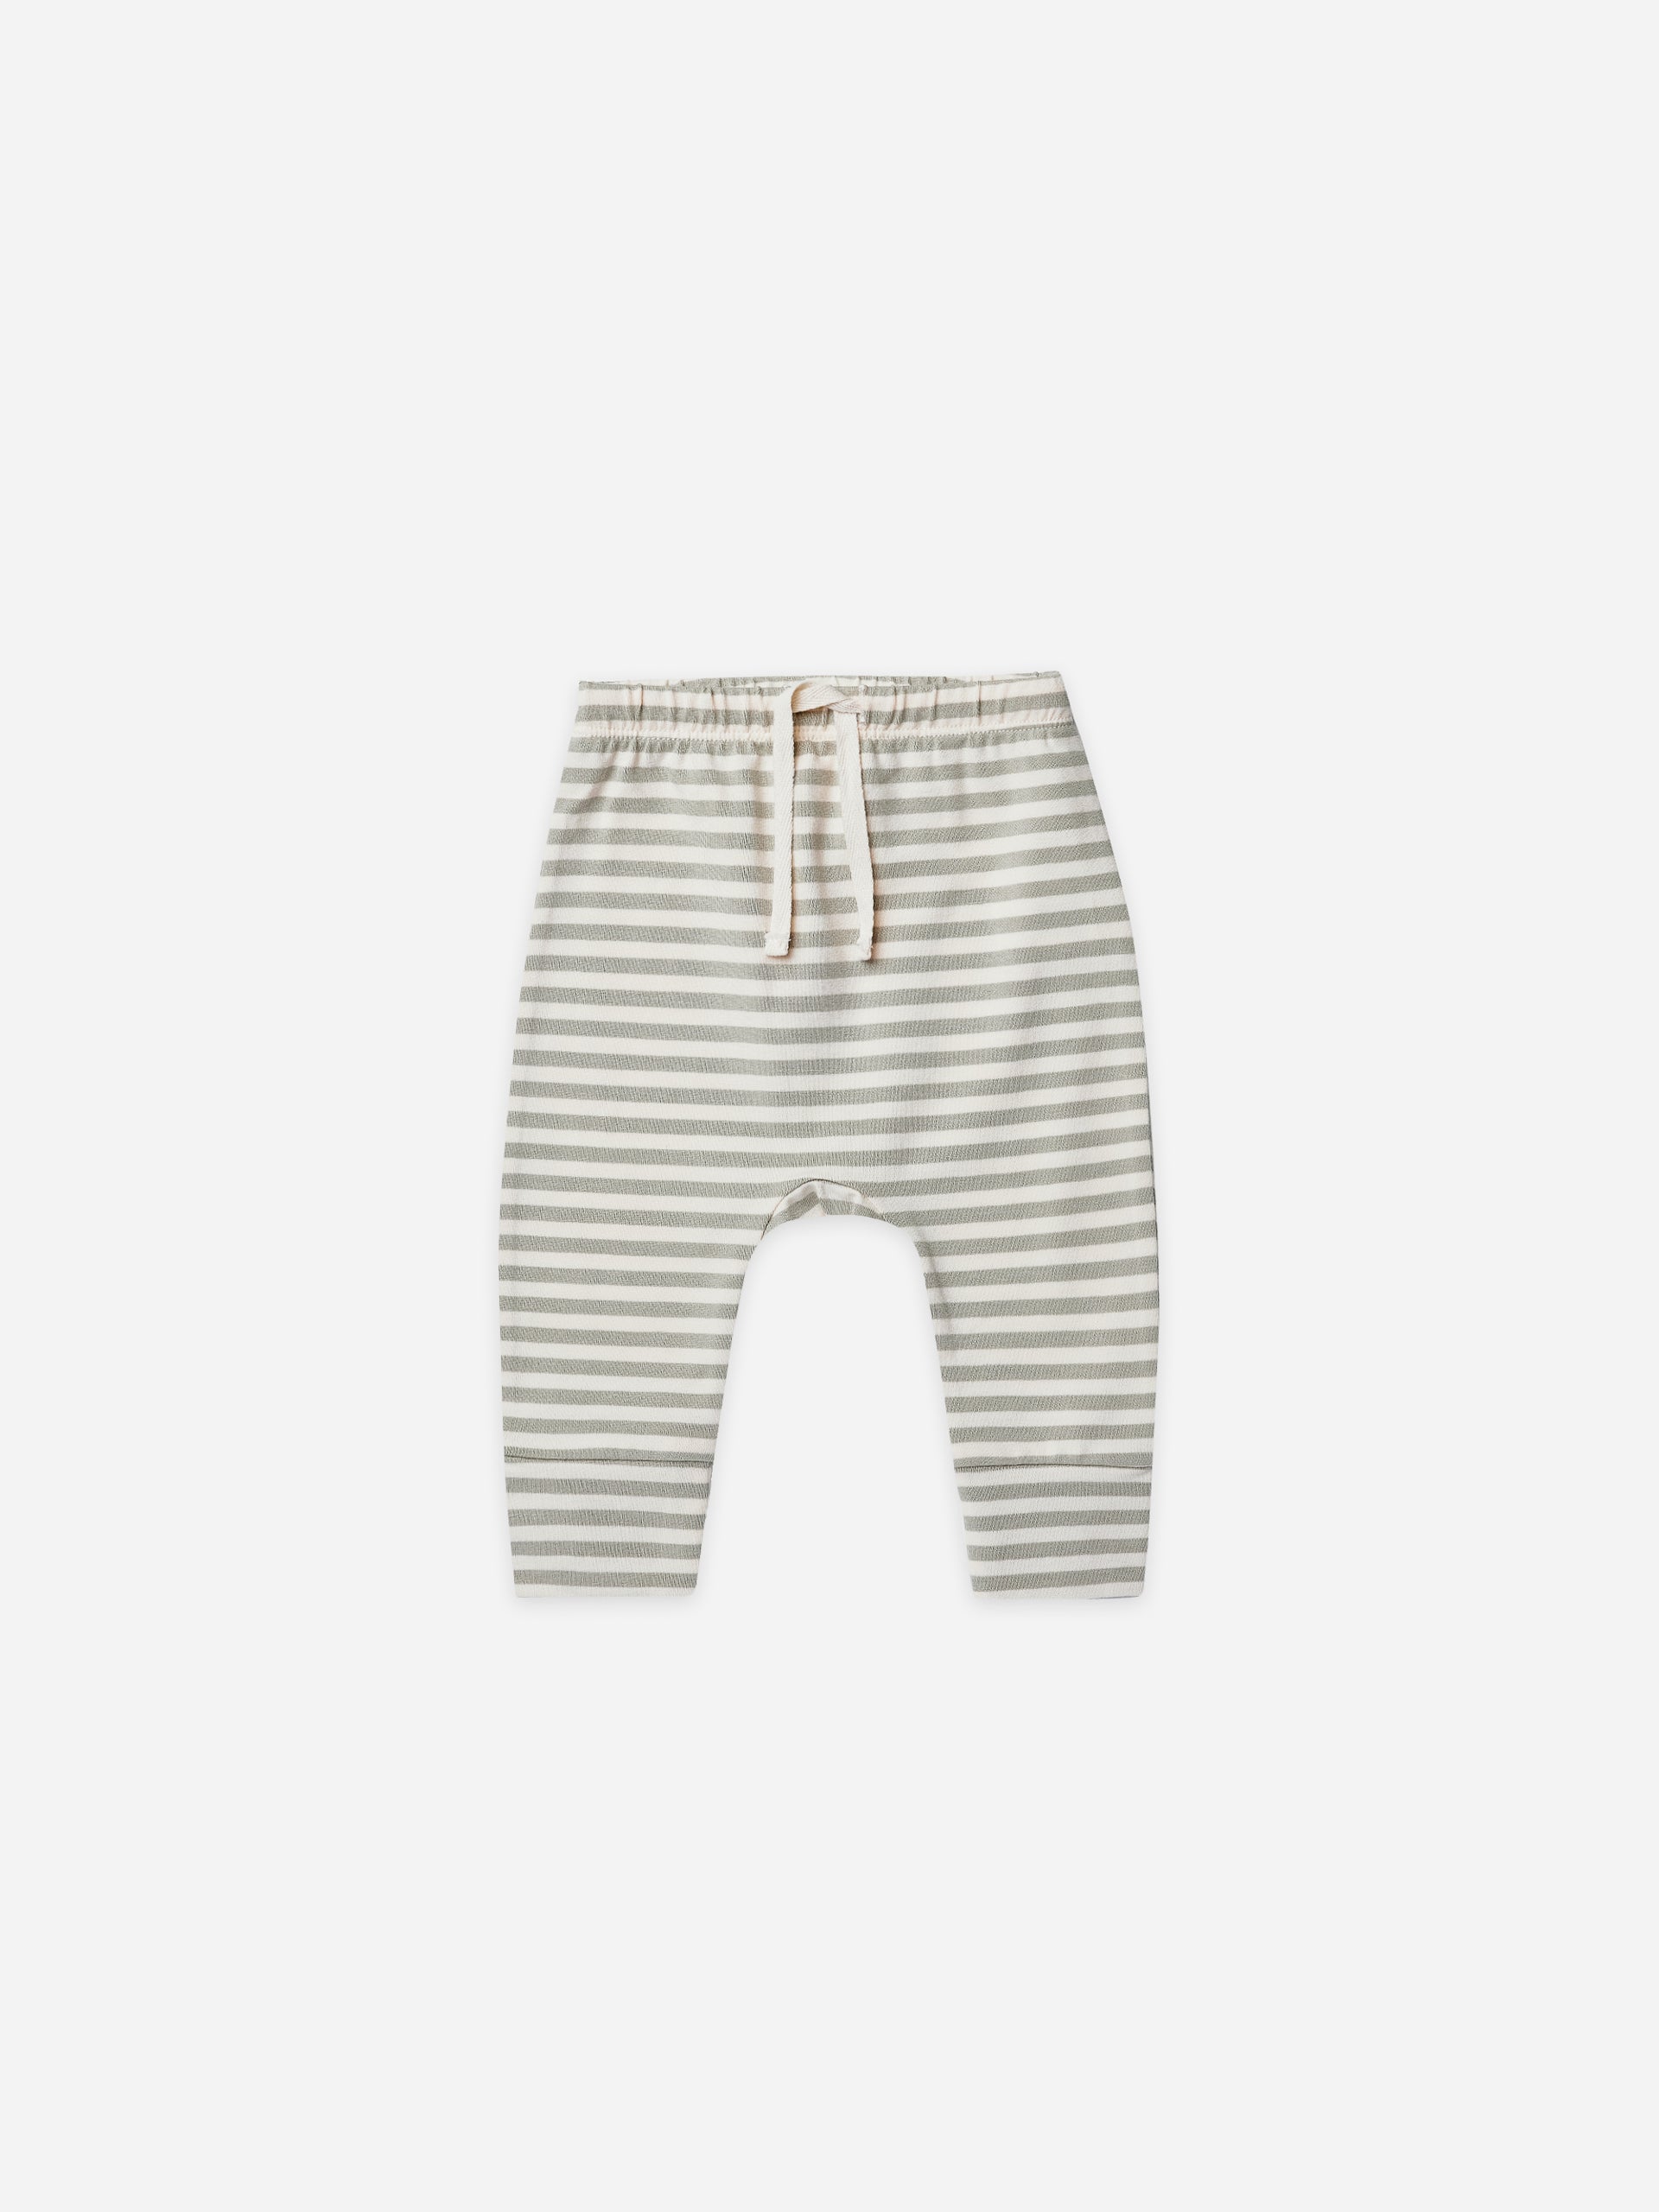 drawstring pant | pistachio stripe - Quincy Mae | Baby Basics | Baby Clothing | Organic Baby Clothes | Modern Baby Boy Clothes |